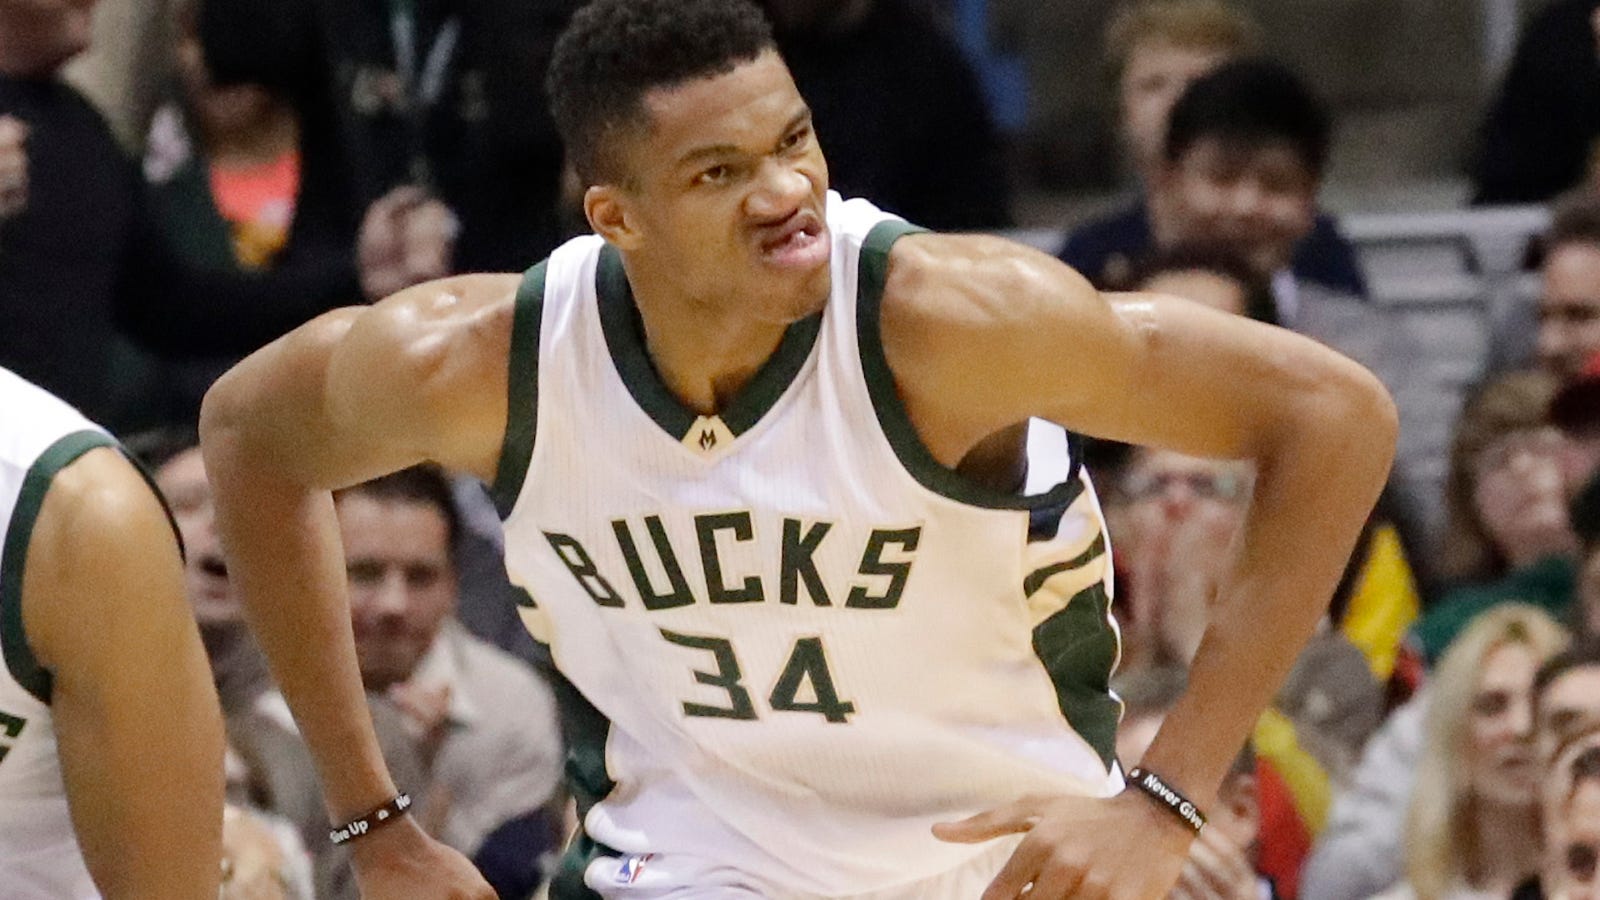 Giannis Antetokounmpo Went Off And Destroyed The Cavaliers1600 x 900